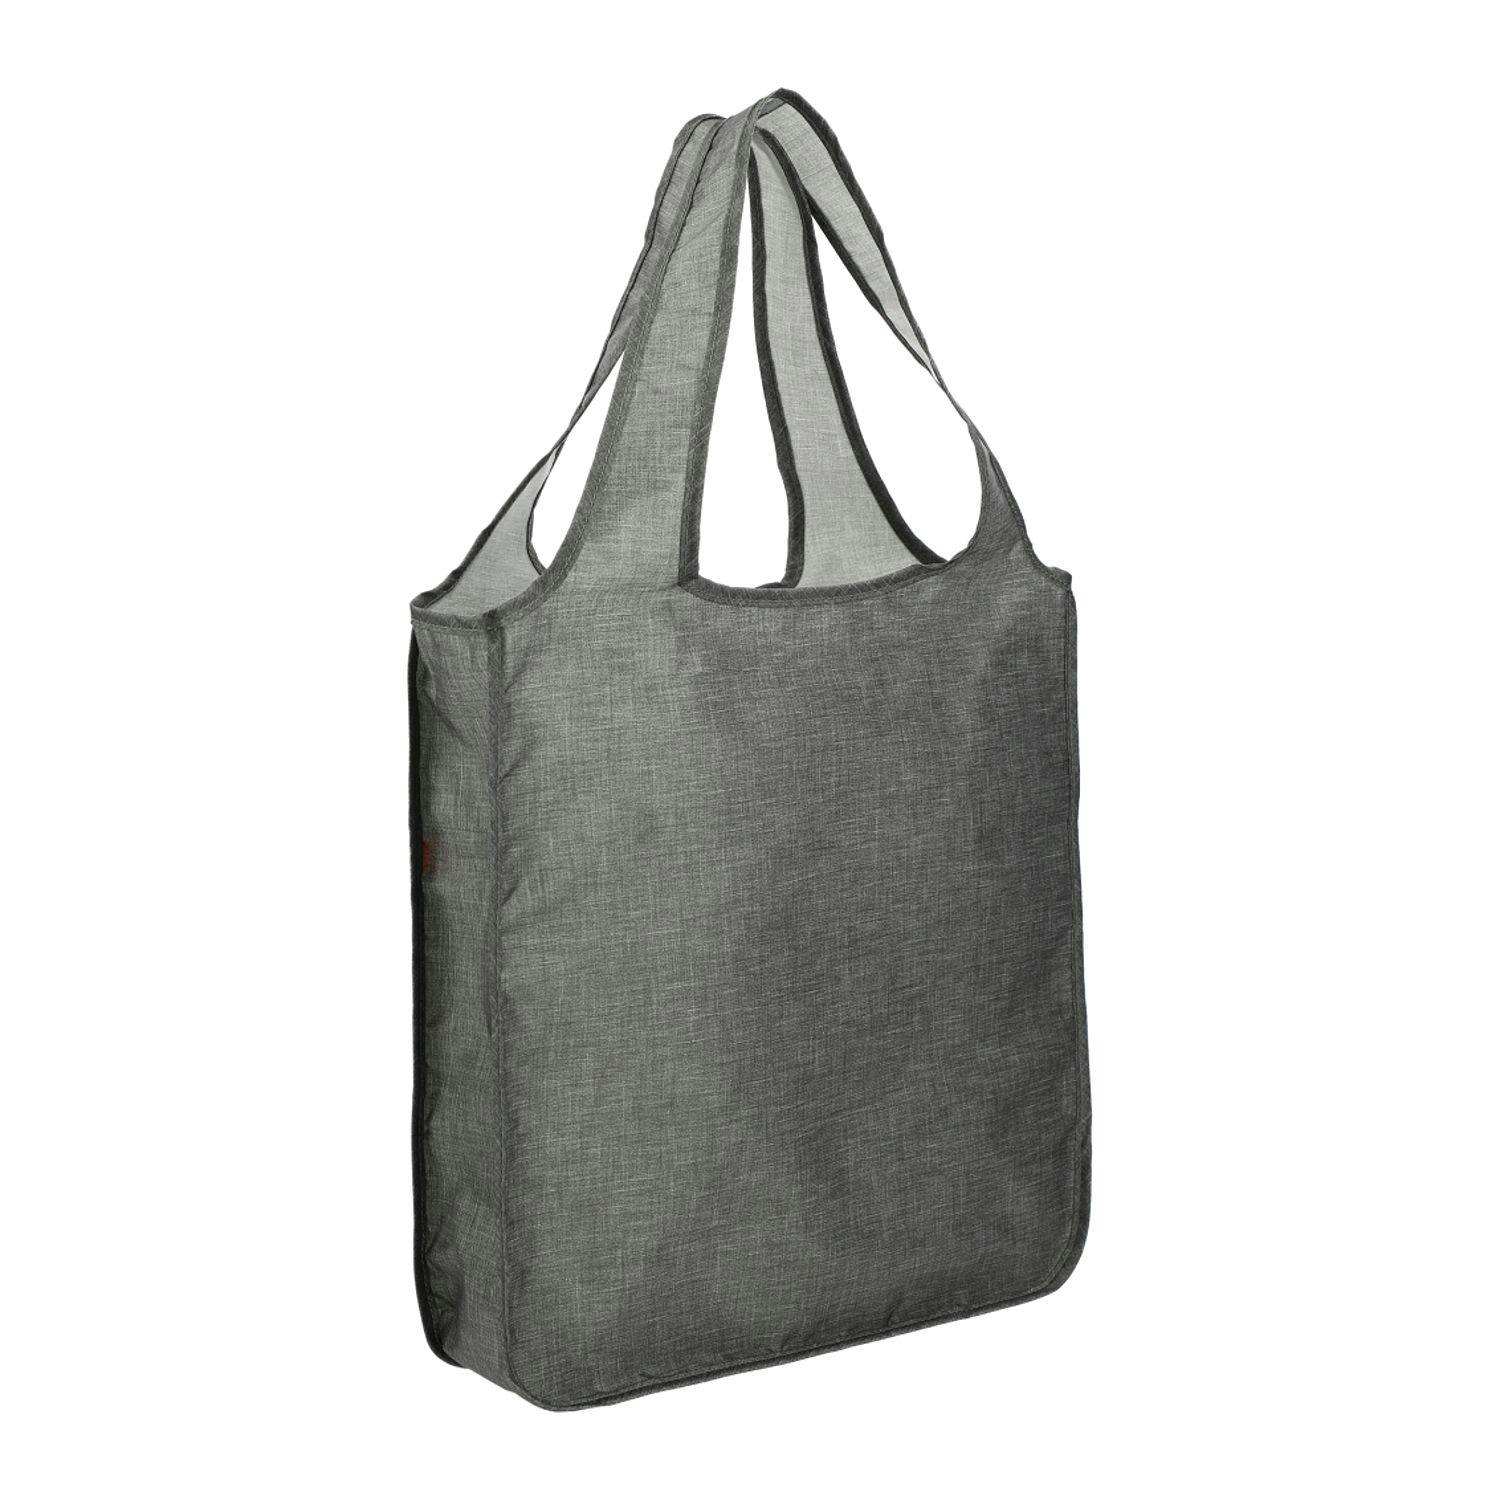 Ash Recycled Large Shopper Tote - additional Image 1